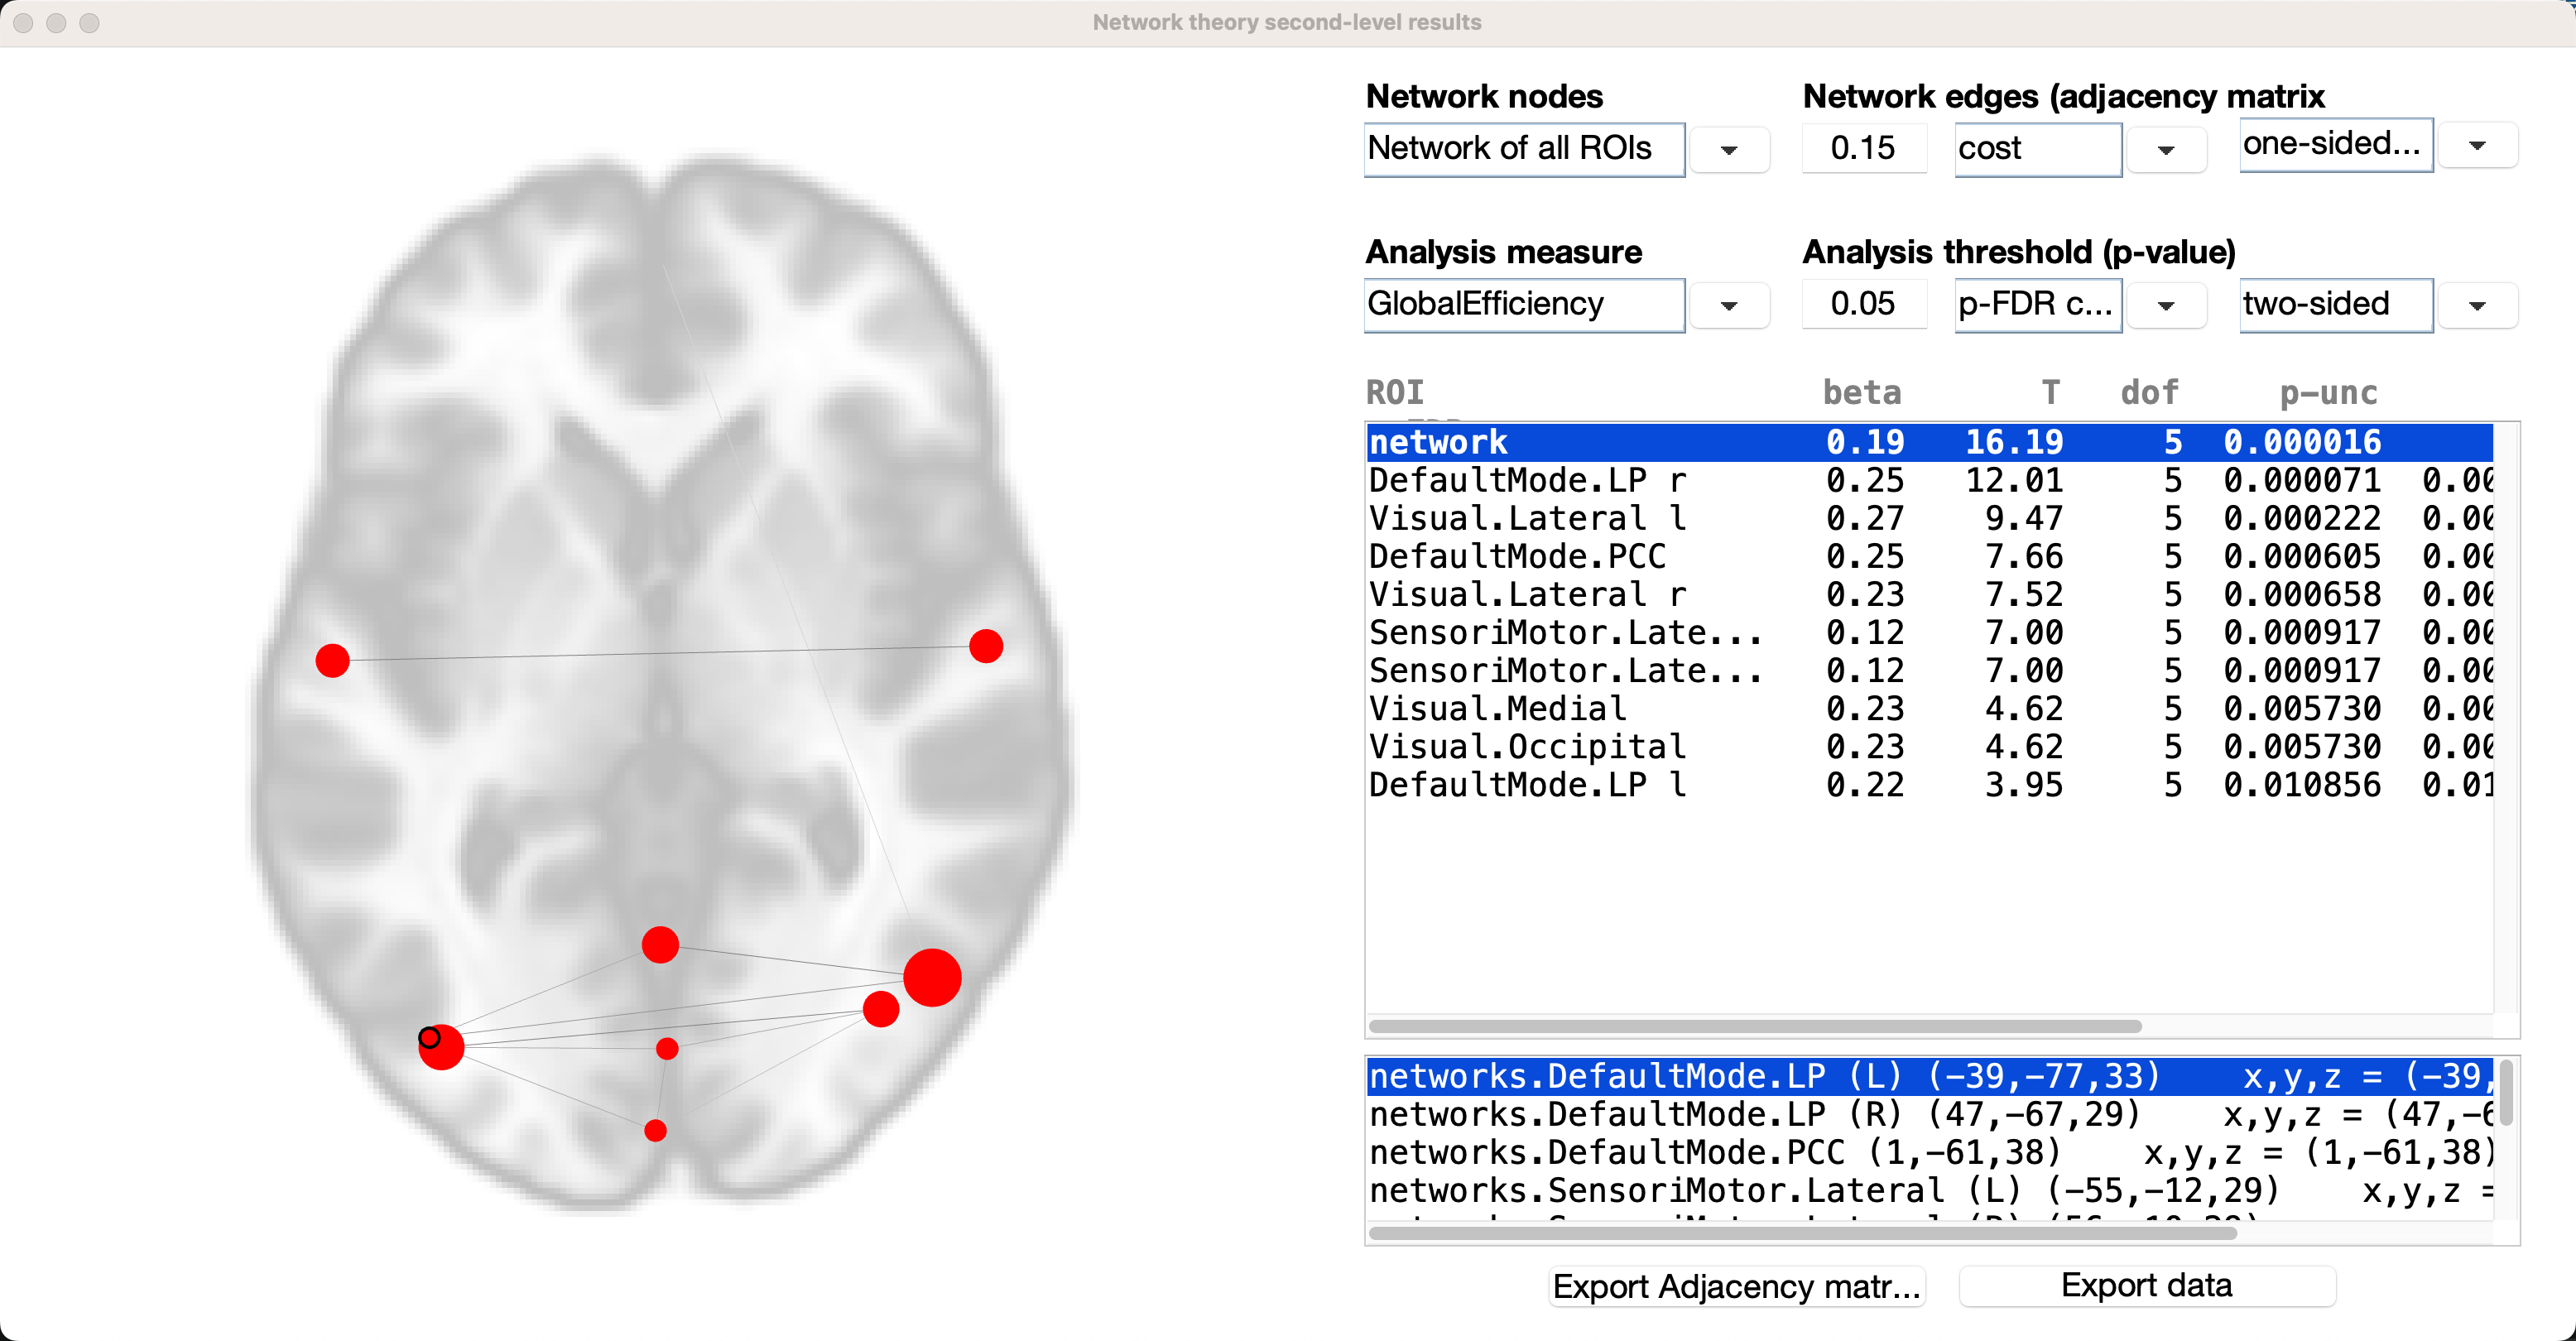 ../../_images/AppendixA_NetworkTheory_Results.png